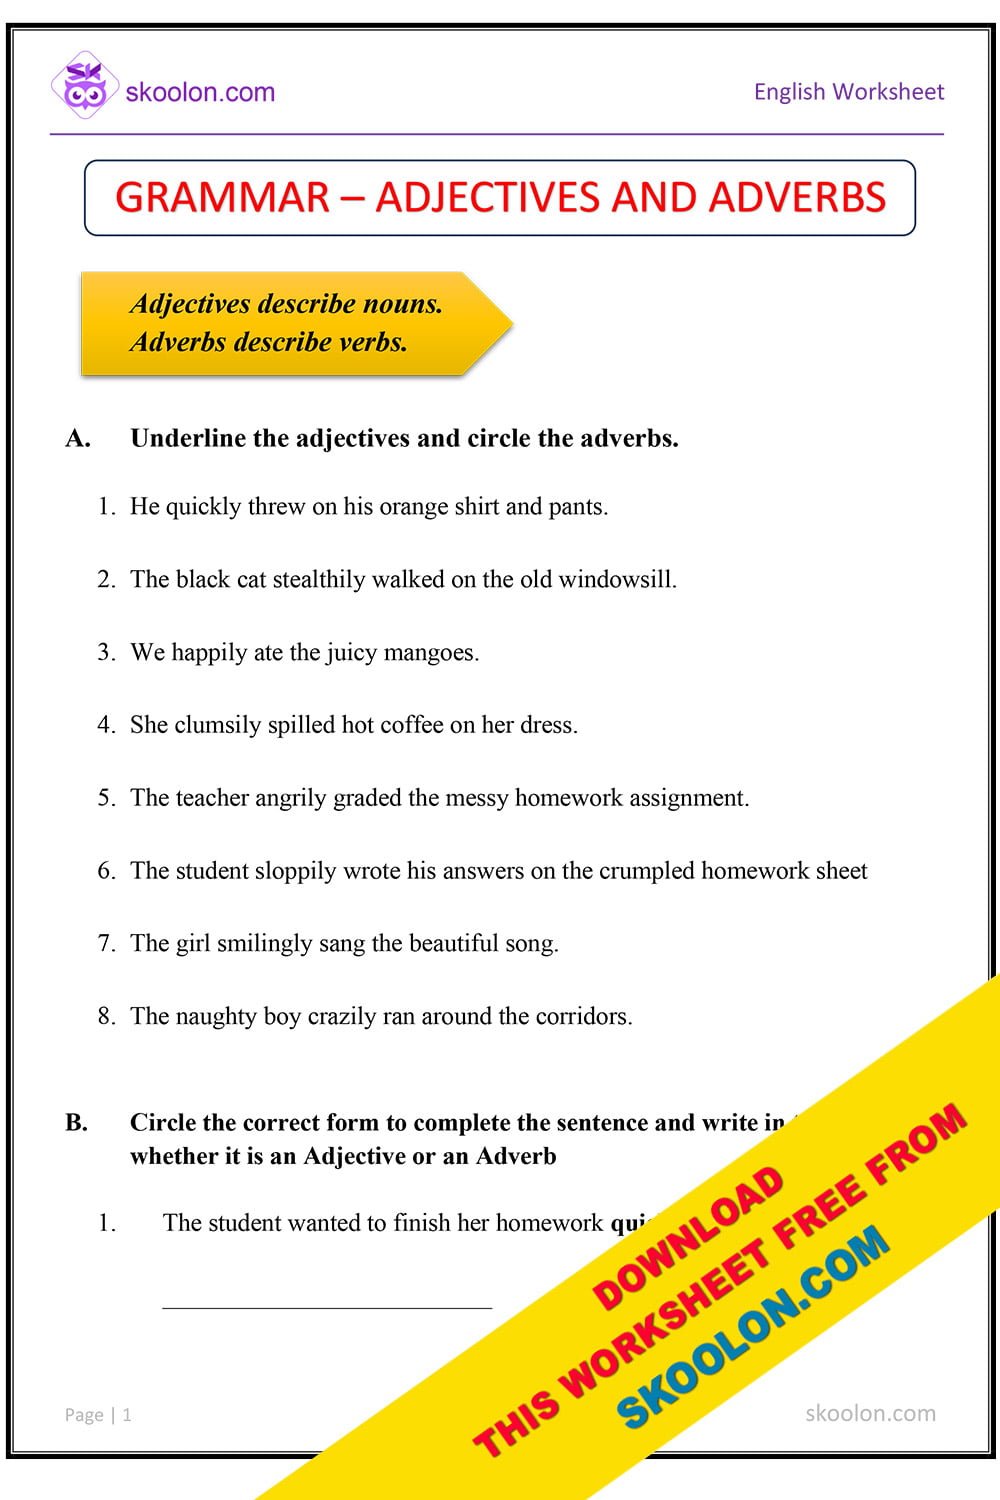 How To Understand Adjectives And Adverbs